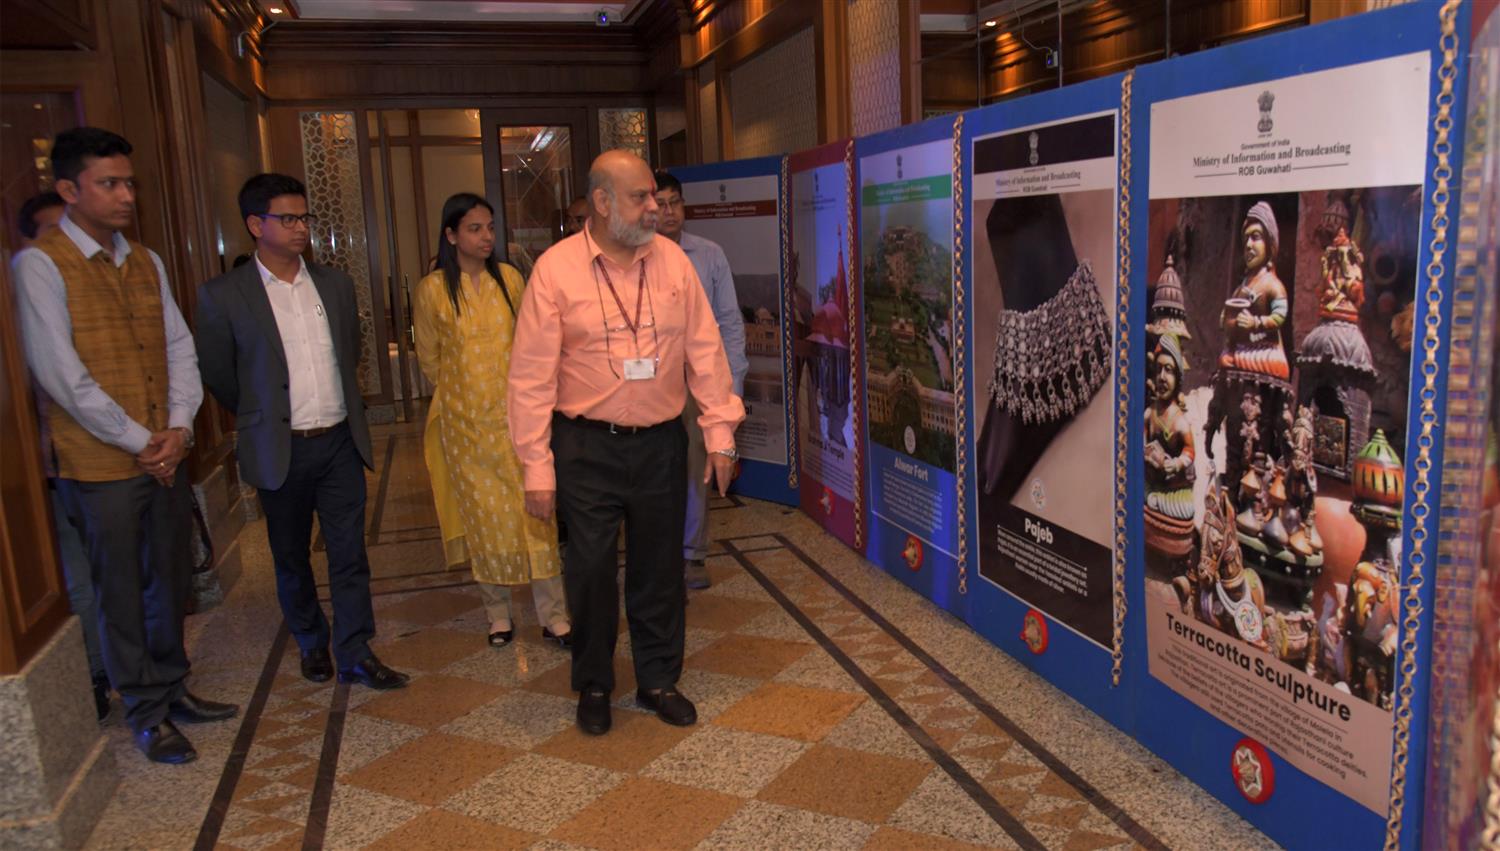  Shri L R Vishwanath, Director General, Ministry of Information & Broadcasting NEZ visiting photo exhibition put up by Regional Outreach Bureau, Government of India  at  an  Review Workshop on Mission Indradhanush  2.0, Guwahati on 28th February 2020.